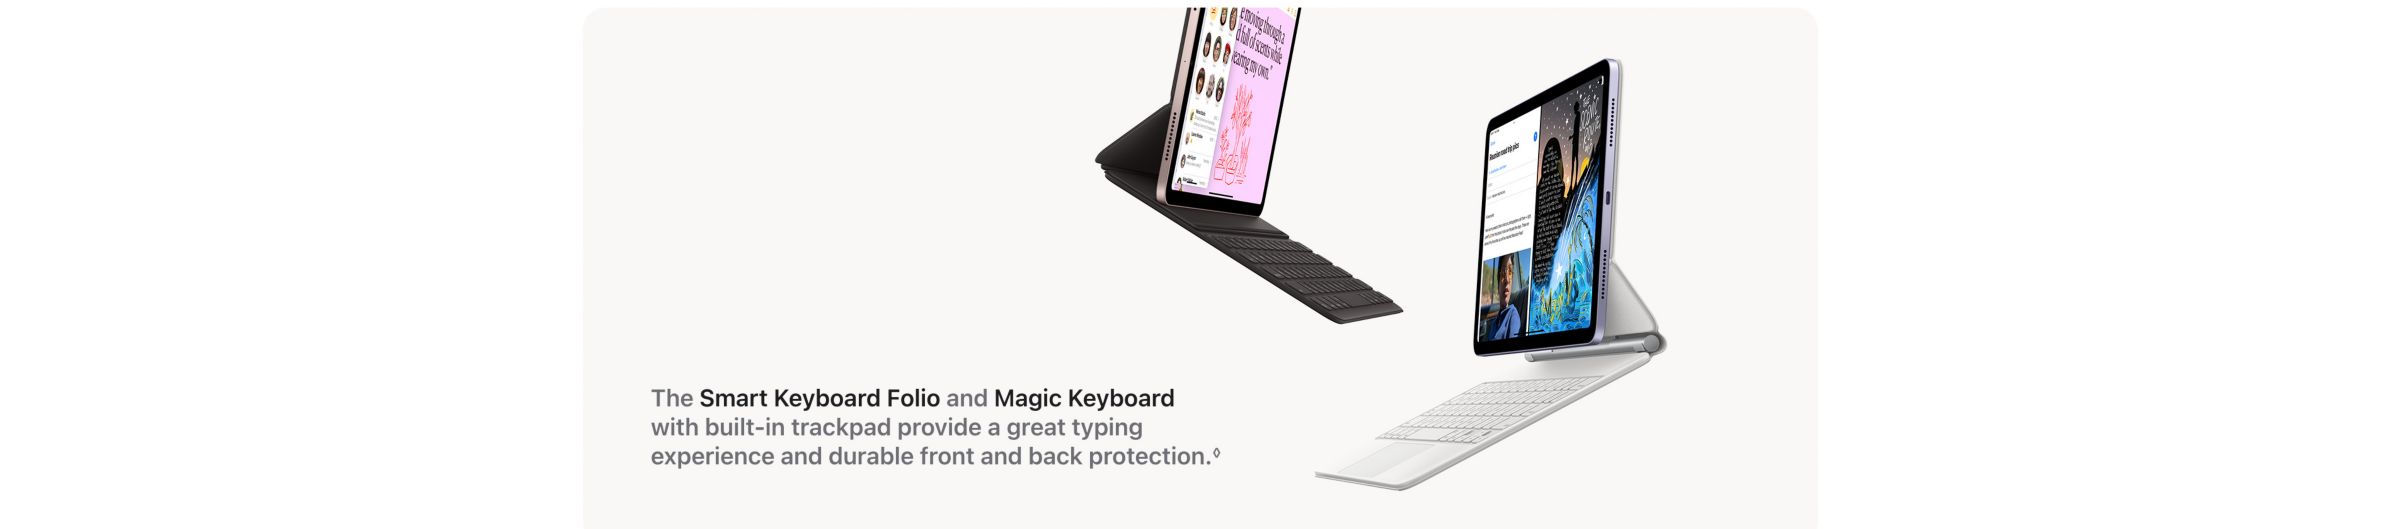 The Smart Keyboard Folio and Magic Keyboard with built-in trackpad provide a great typing experience and durable front and back protection.